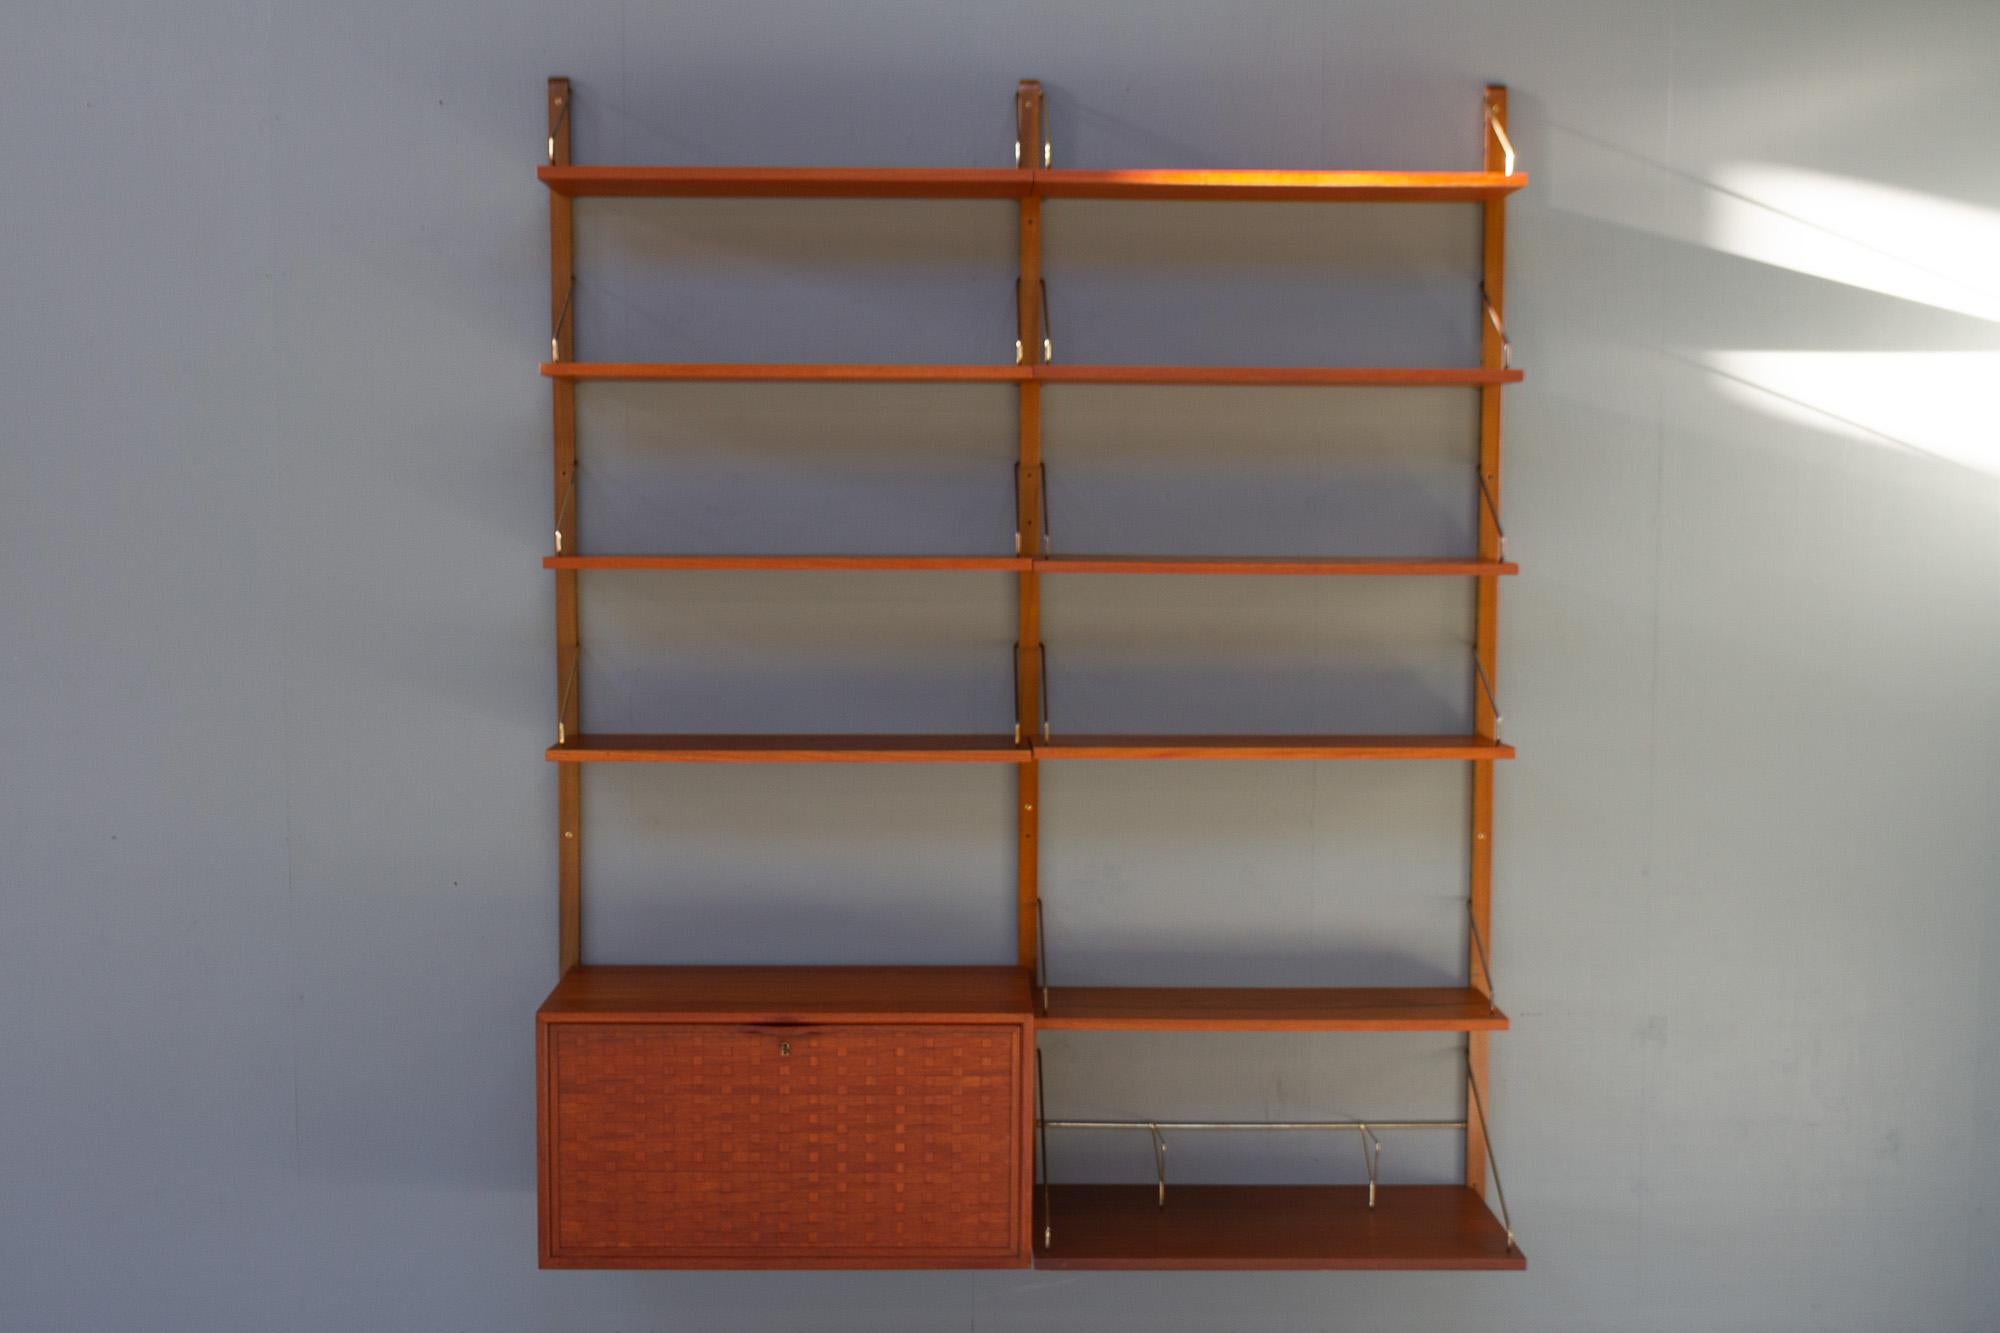 Vintage Danish teak wall unit by Poul Cadovius for Cado, 1950s.

Mid-Century Modern 2 bay shelving system model Royal. This is a original vintage floating bookcase designed in 1948 by Danish architect Poul Cadovius. 
Cadovius had the revolutionary